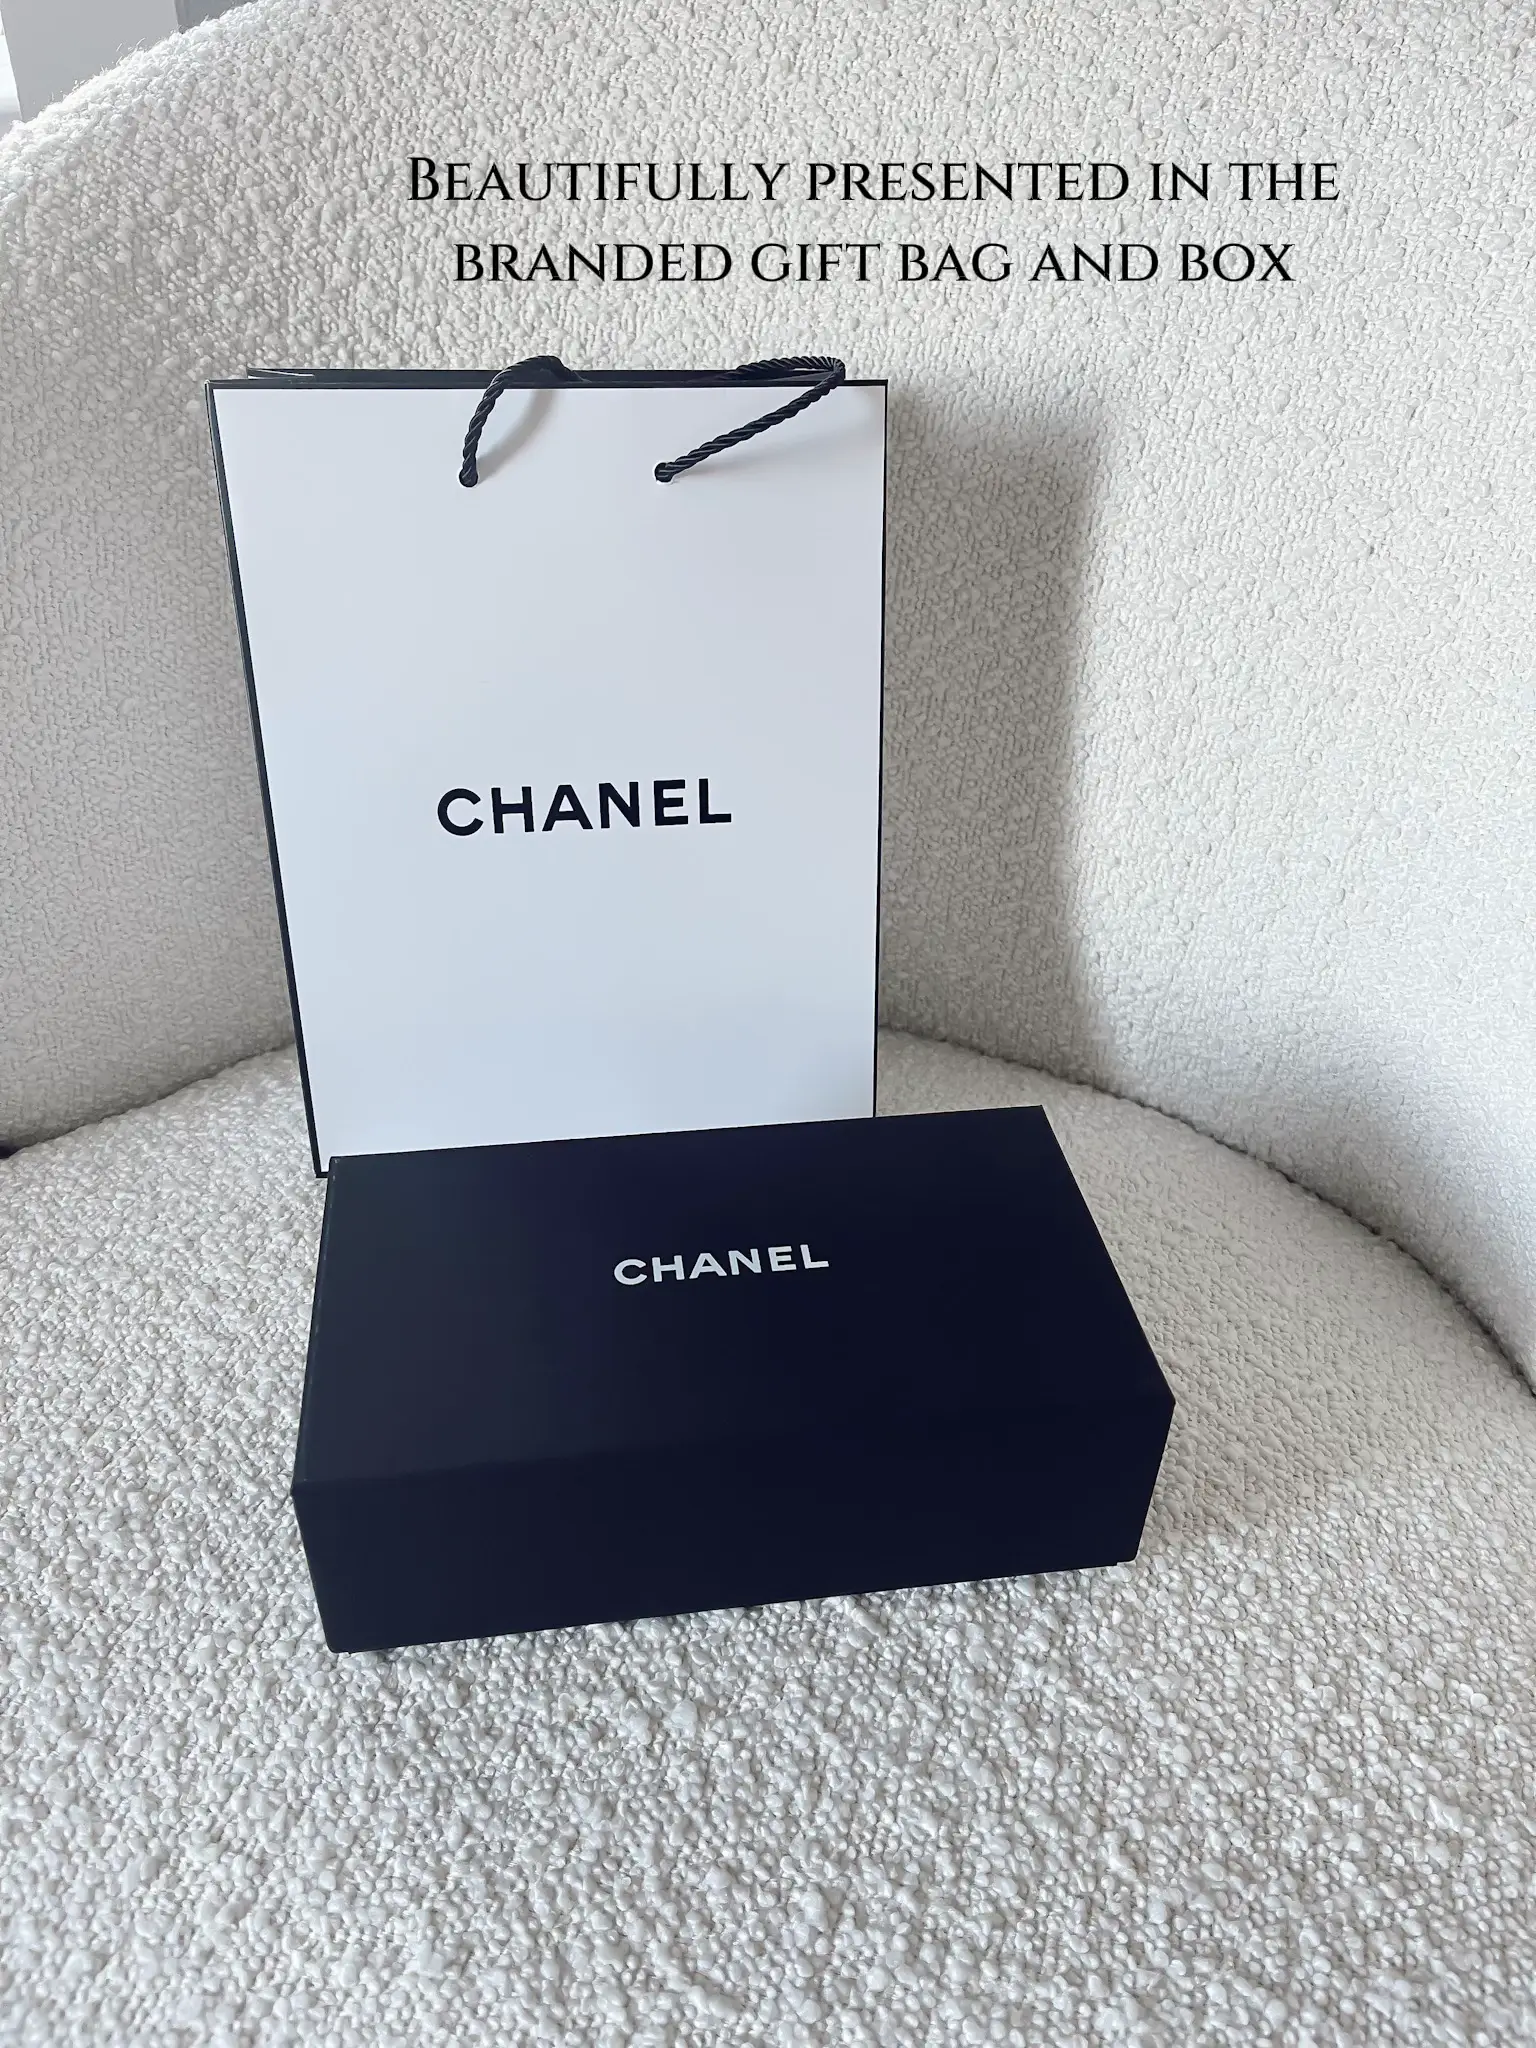 CHANEL SUNGLASSES - Review, Gallery posted by Emma Eva